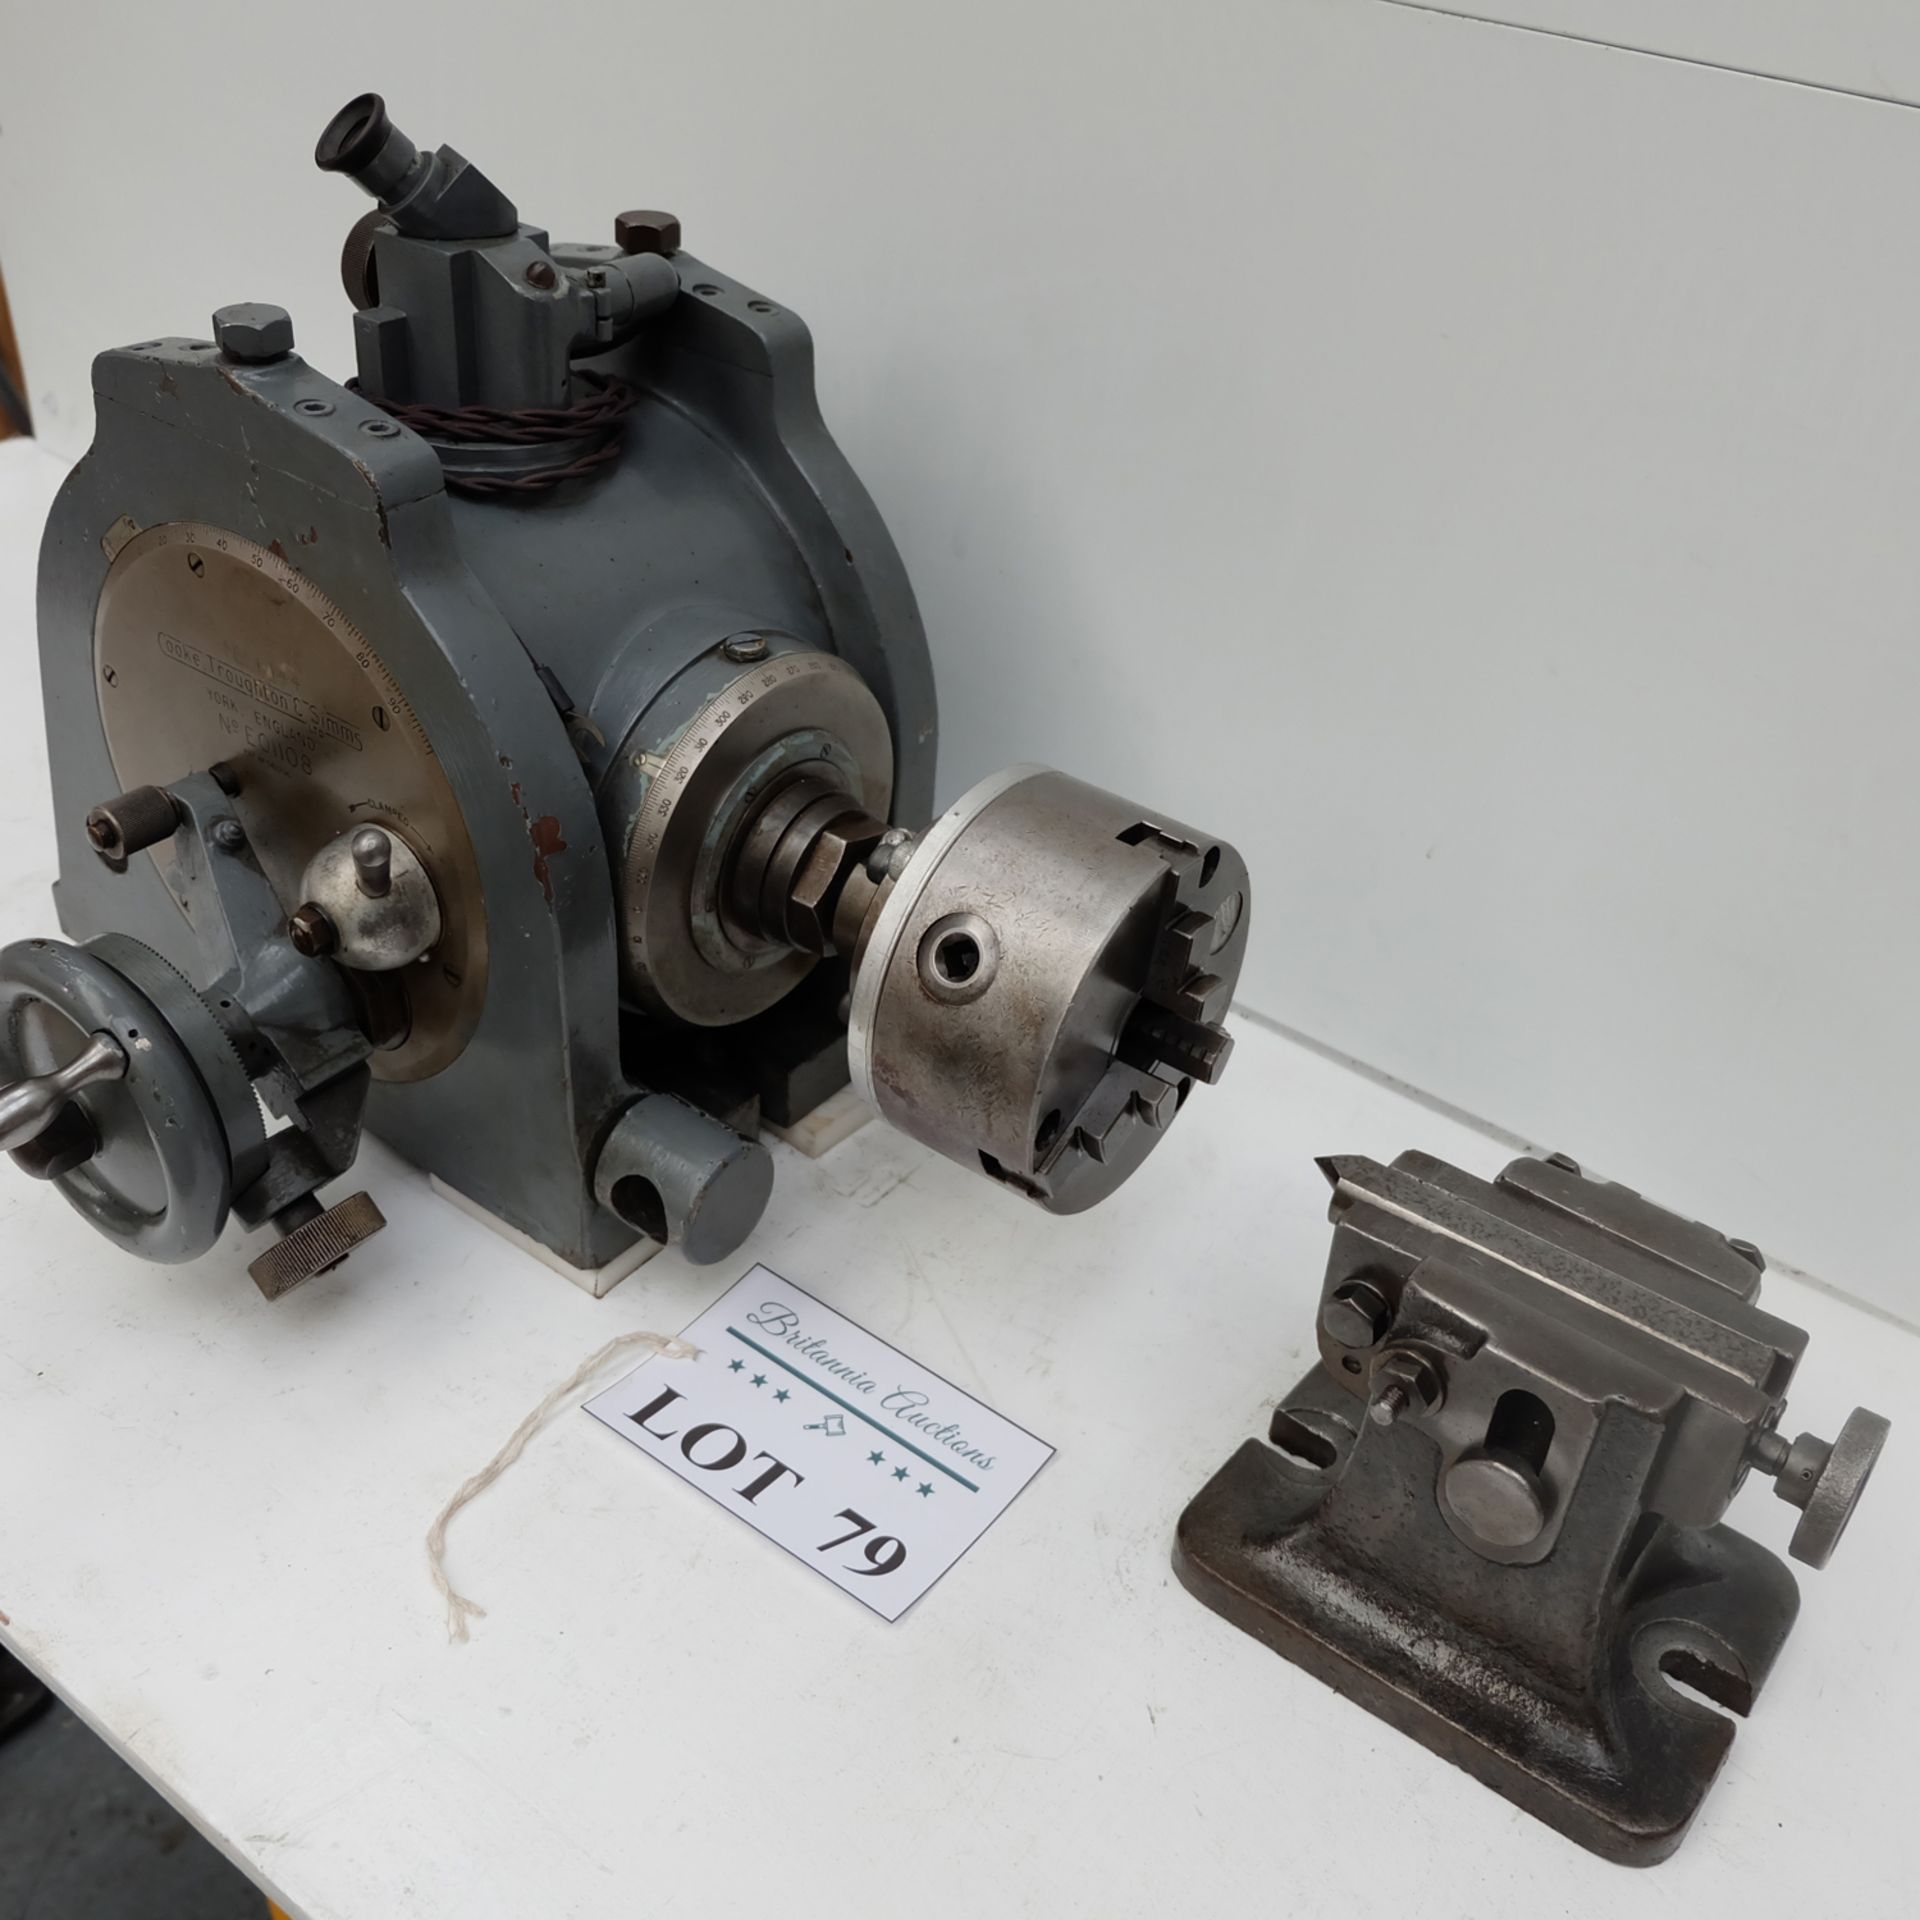 Cook Roughton. Smith 10" Tilting Optical Dividing Head. With 5" 3 Jaw Chuck and Tail Stock. - Image 2 of 10